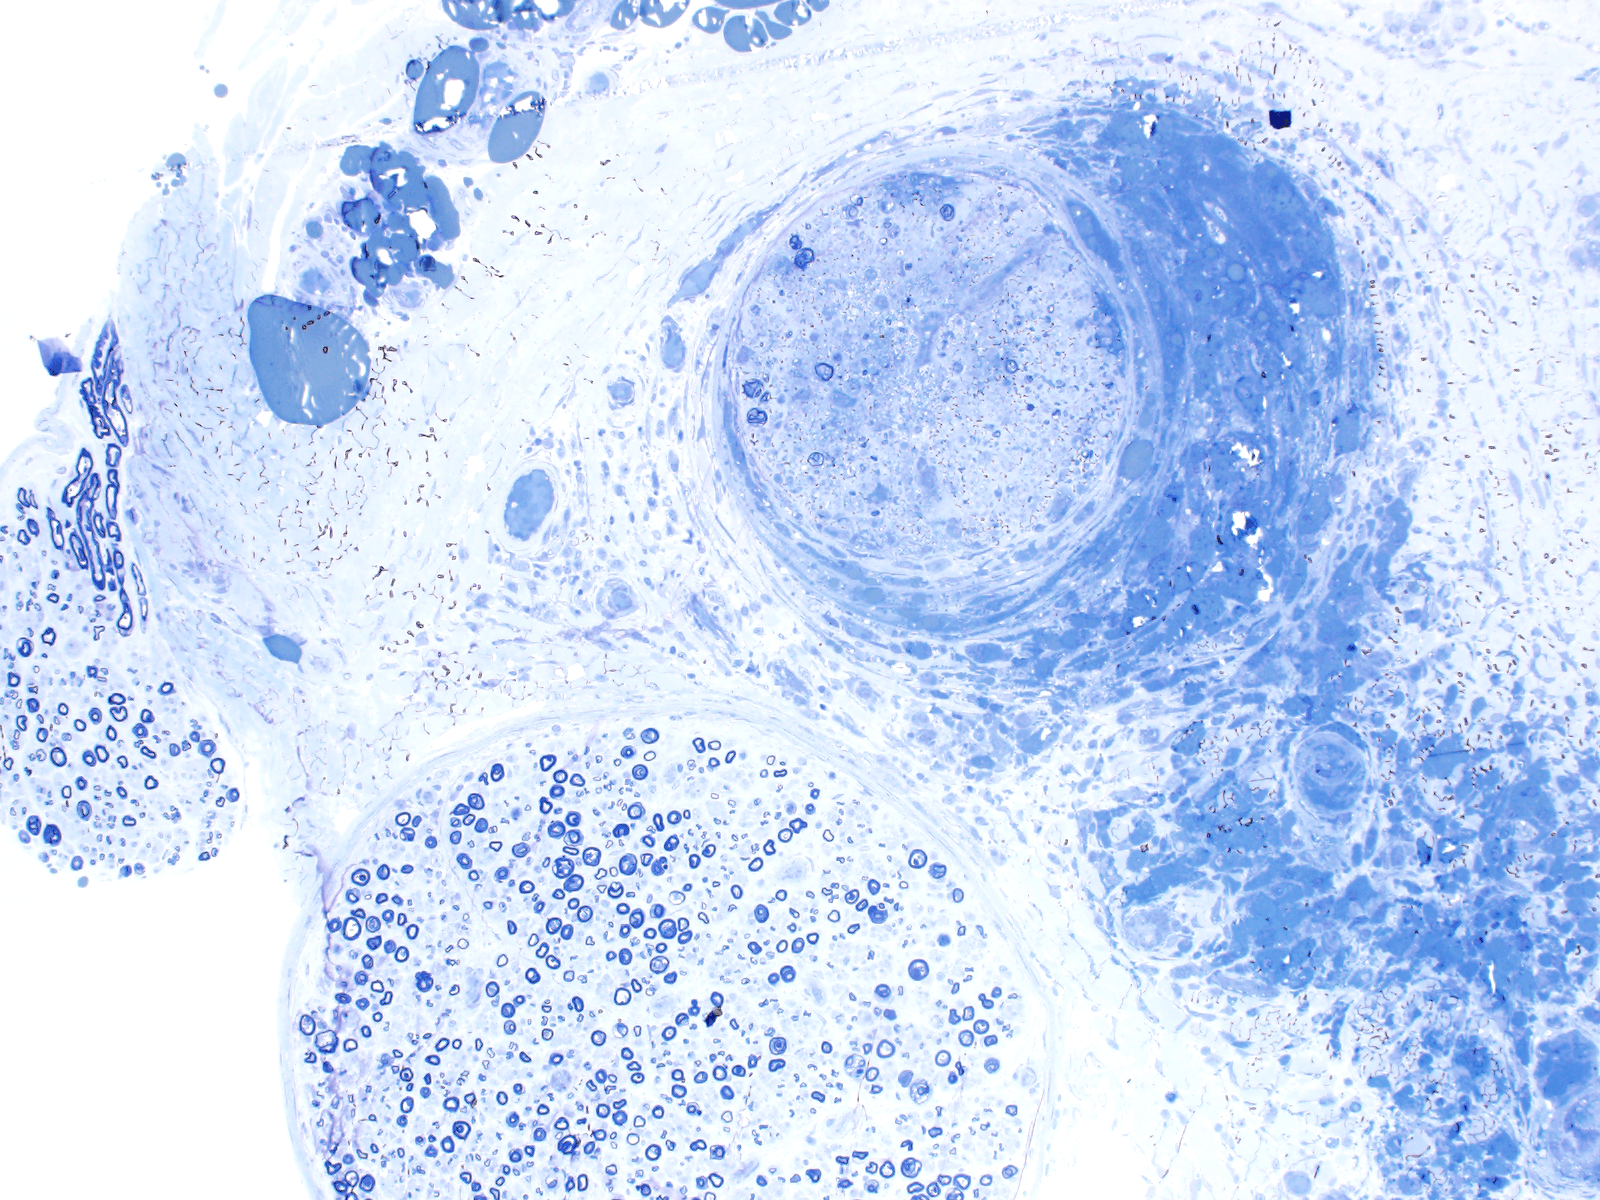 neuropathology image of a muscle biopsy on blue stain